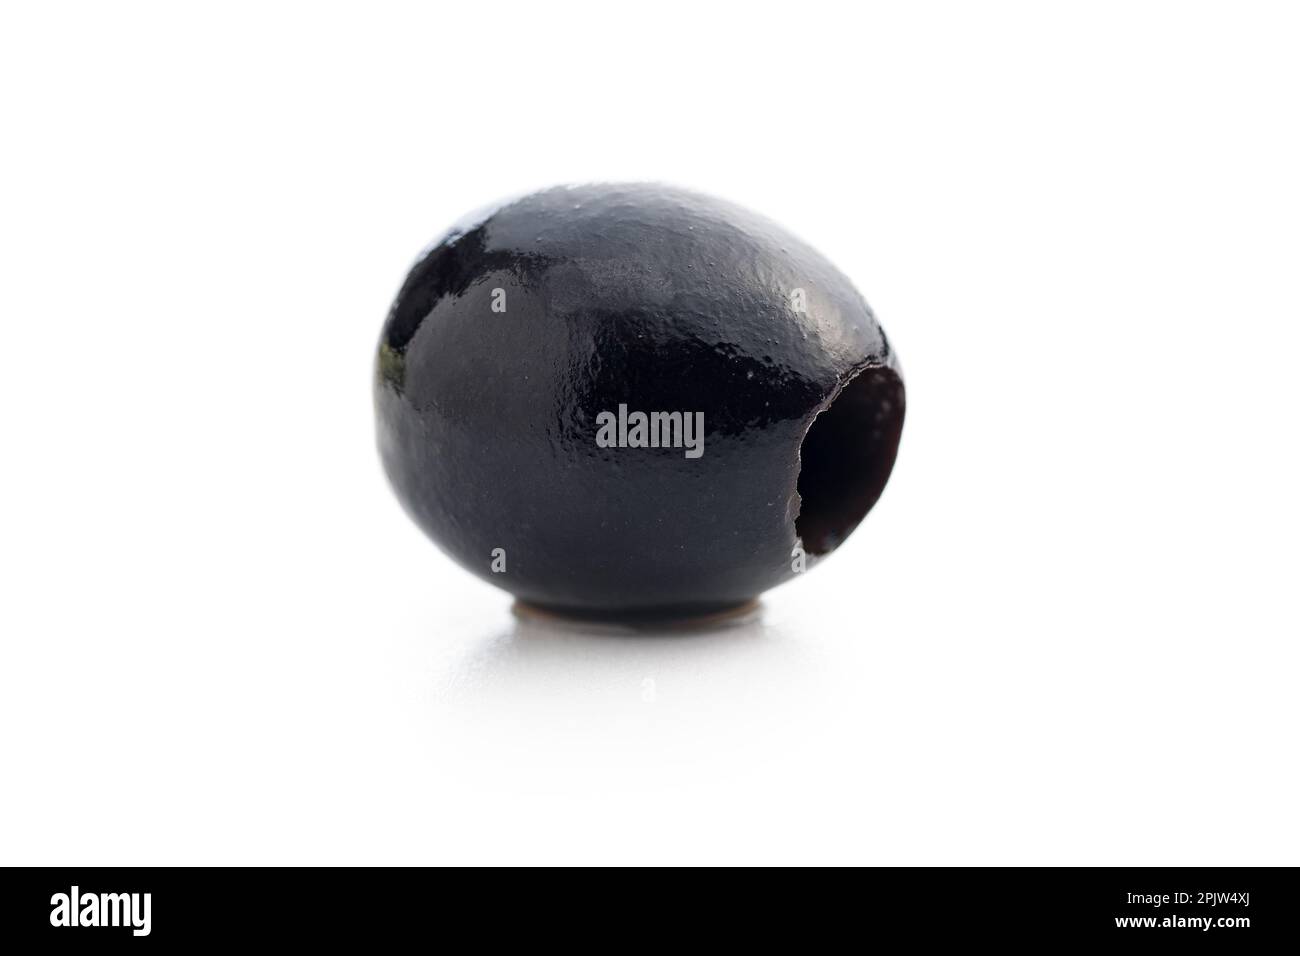 Pitted black olive isolated on the white background. Stock Photo